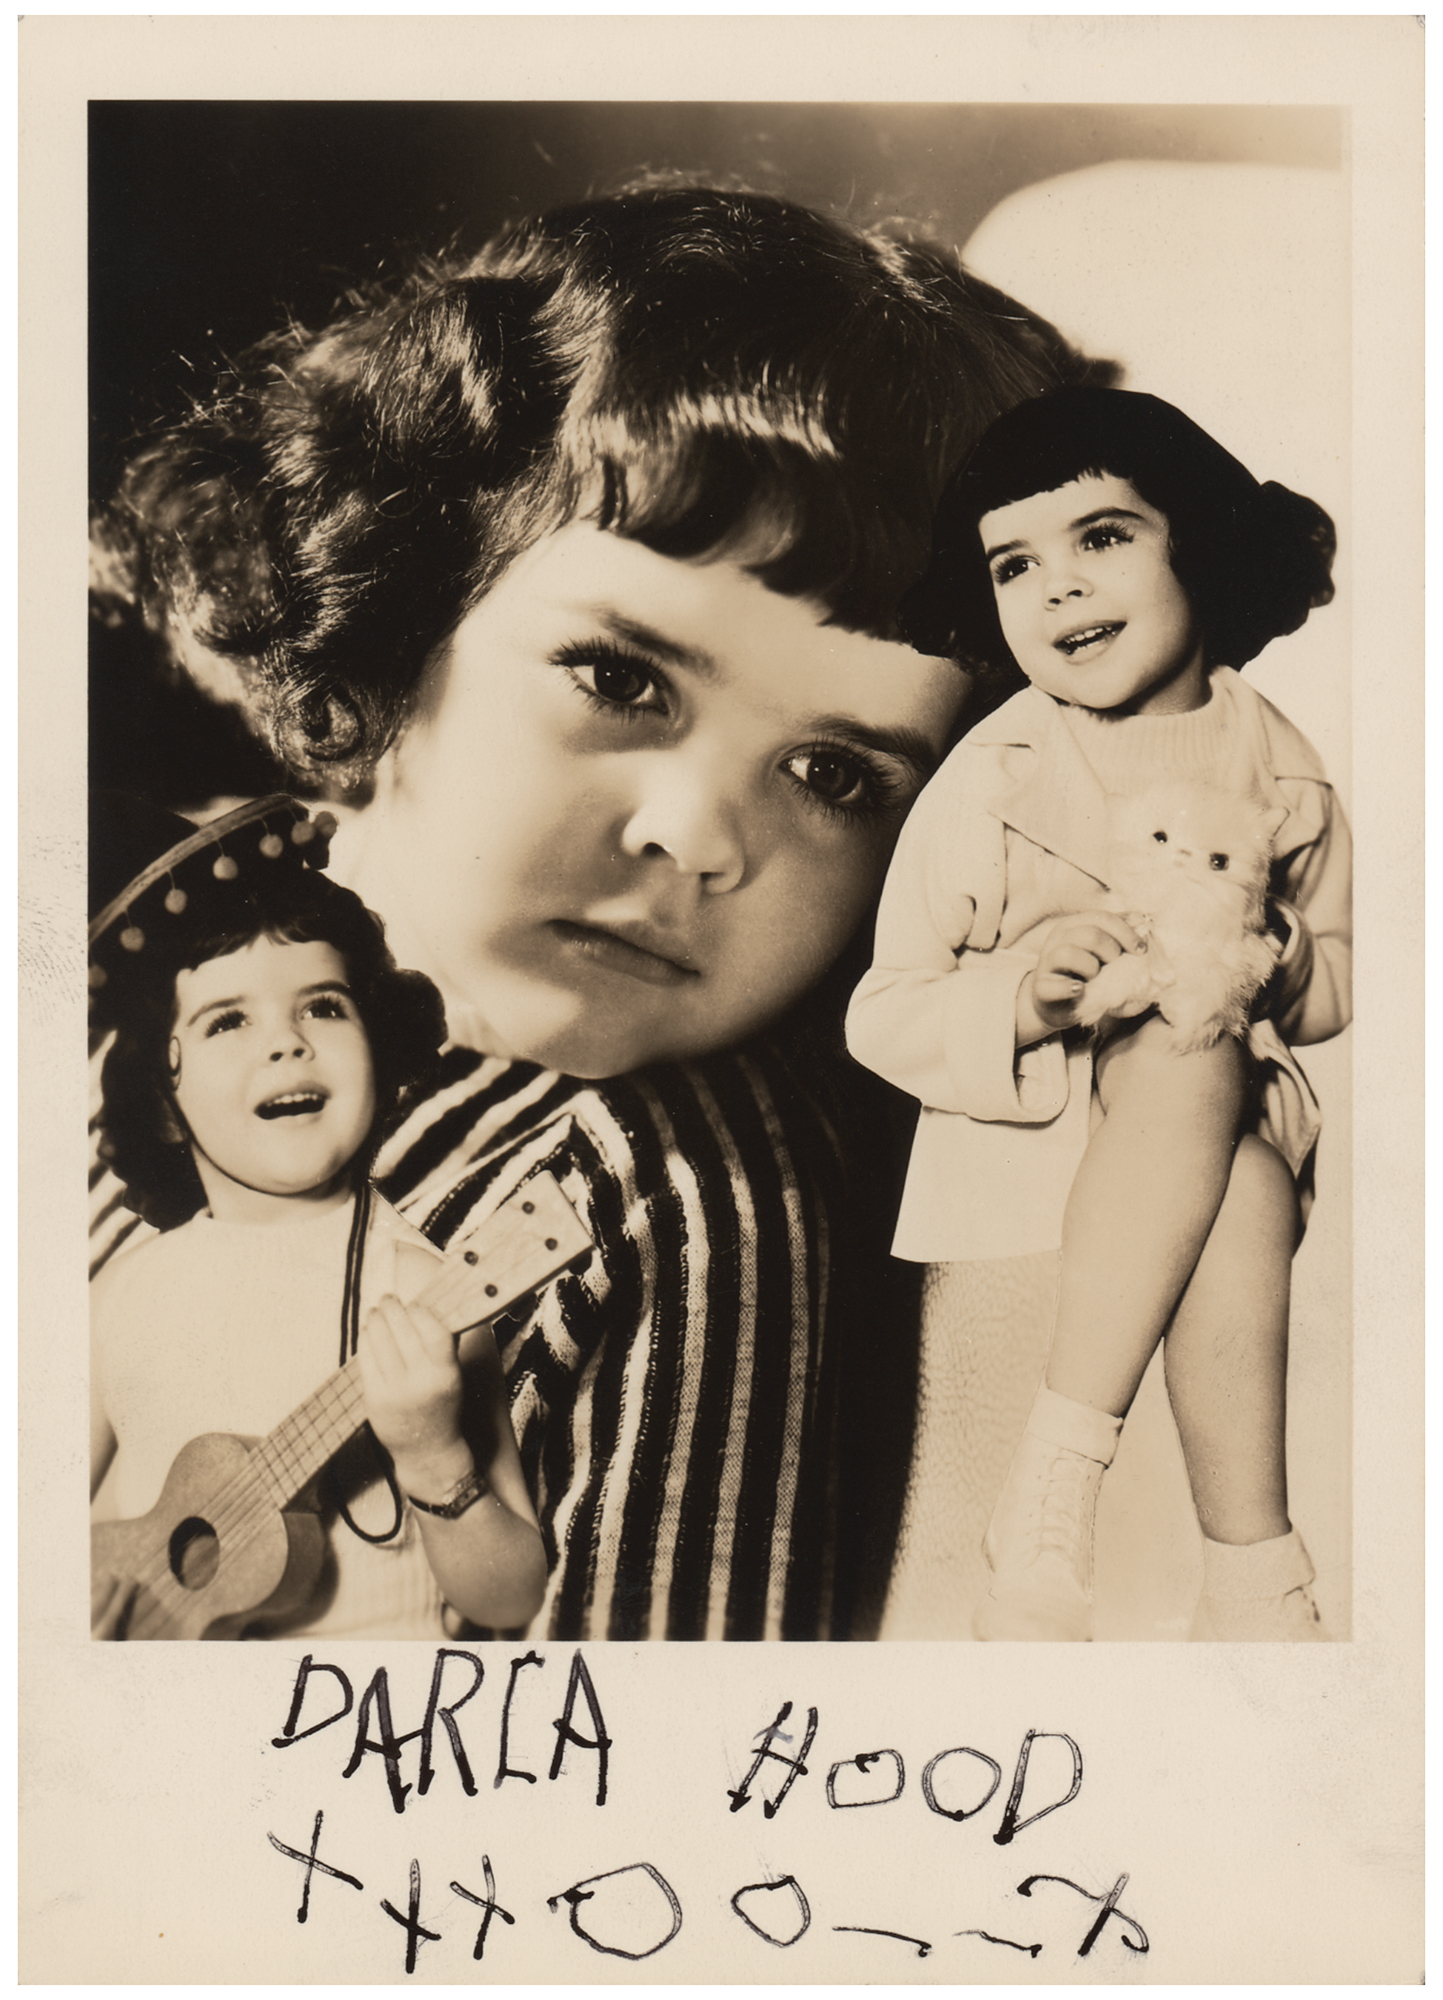 Lot #5450 Our Gang: Darla Hood Signed Photograph